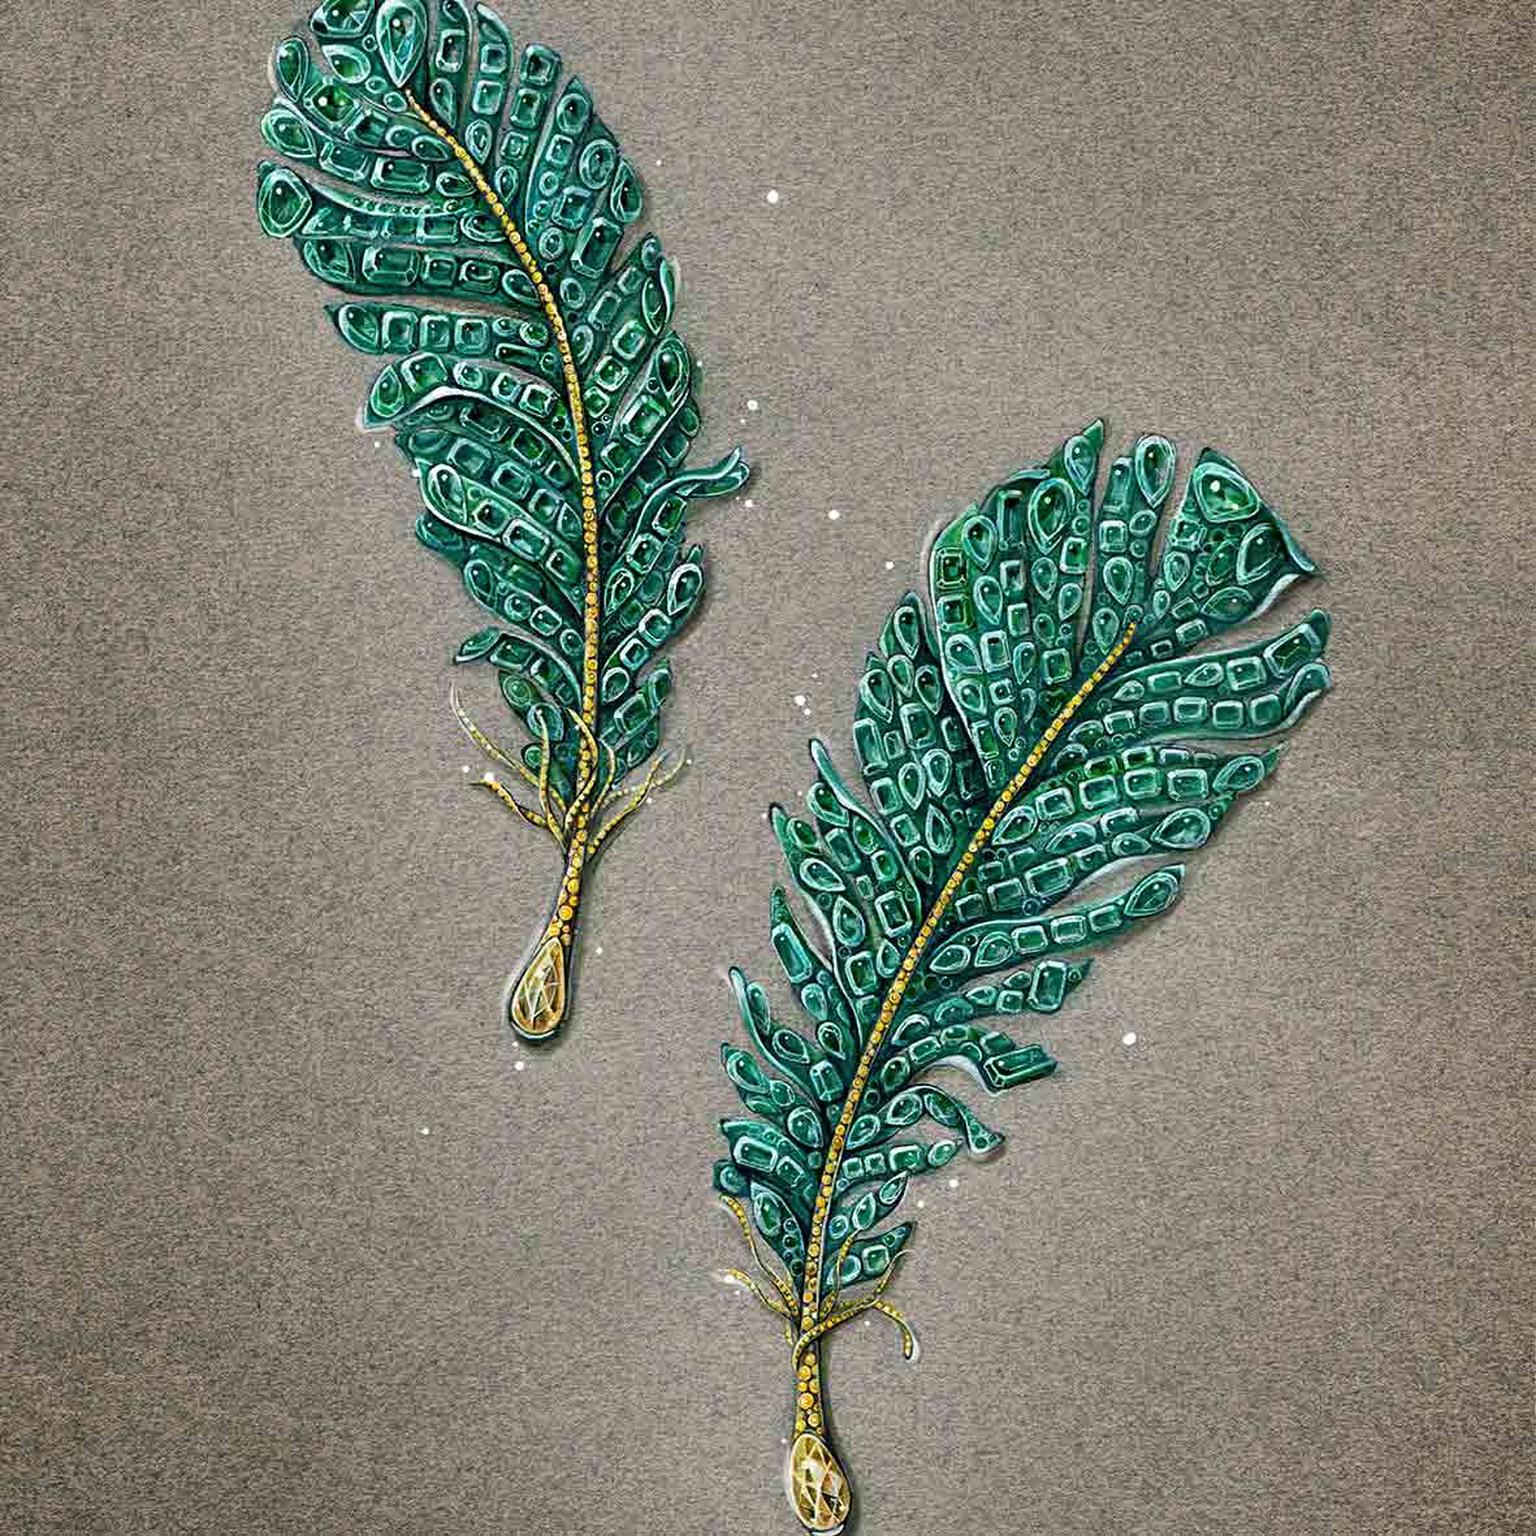 Cindy Chao Black Label Masterpiece emerald feather brooches sketch